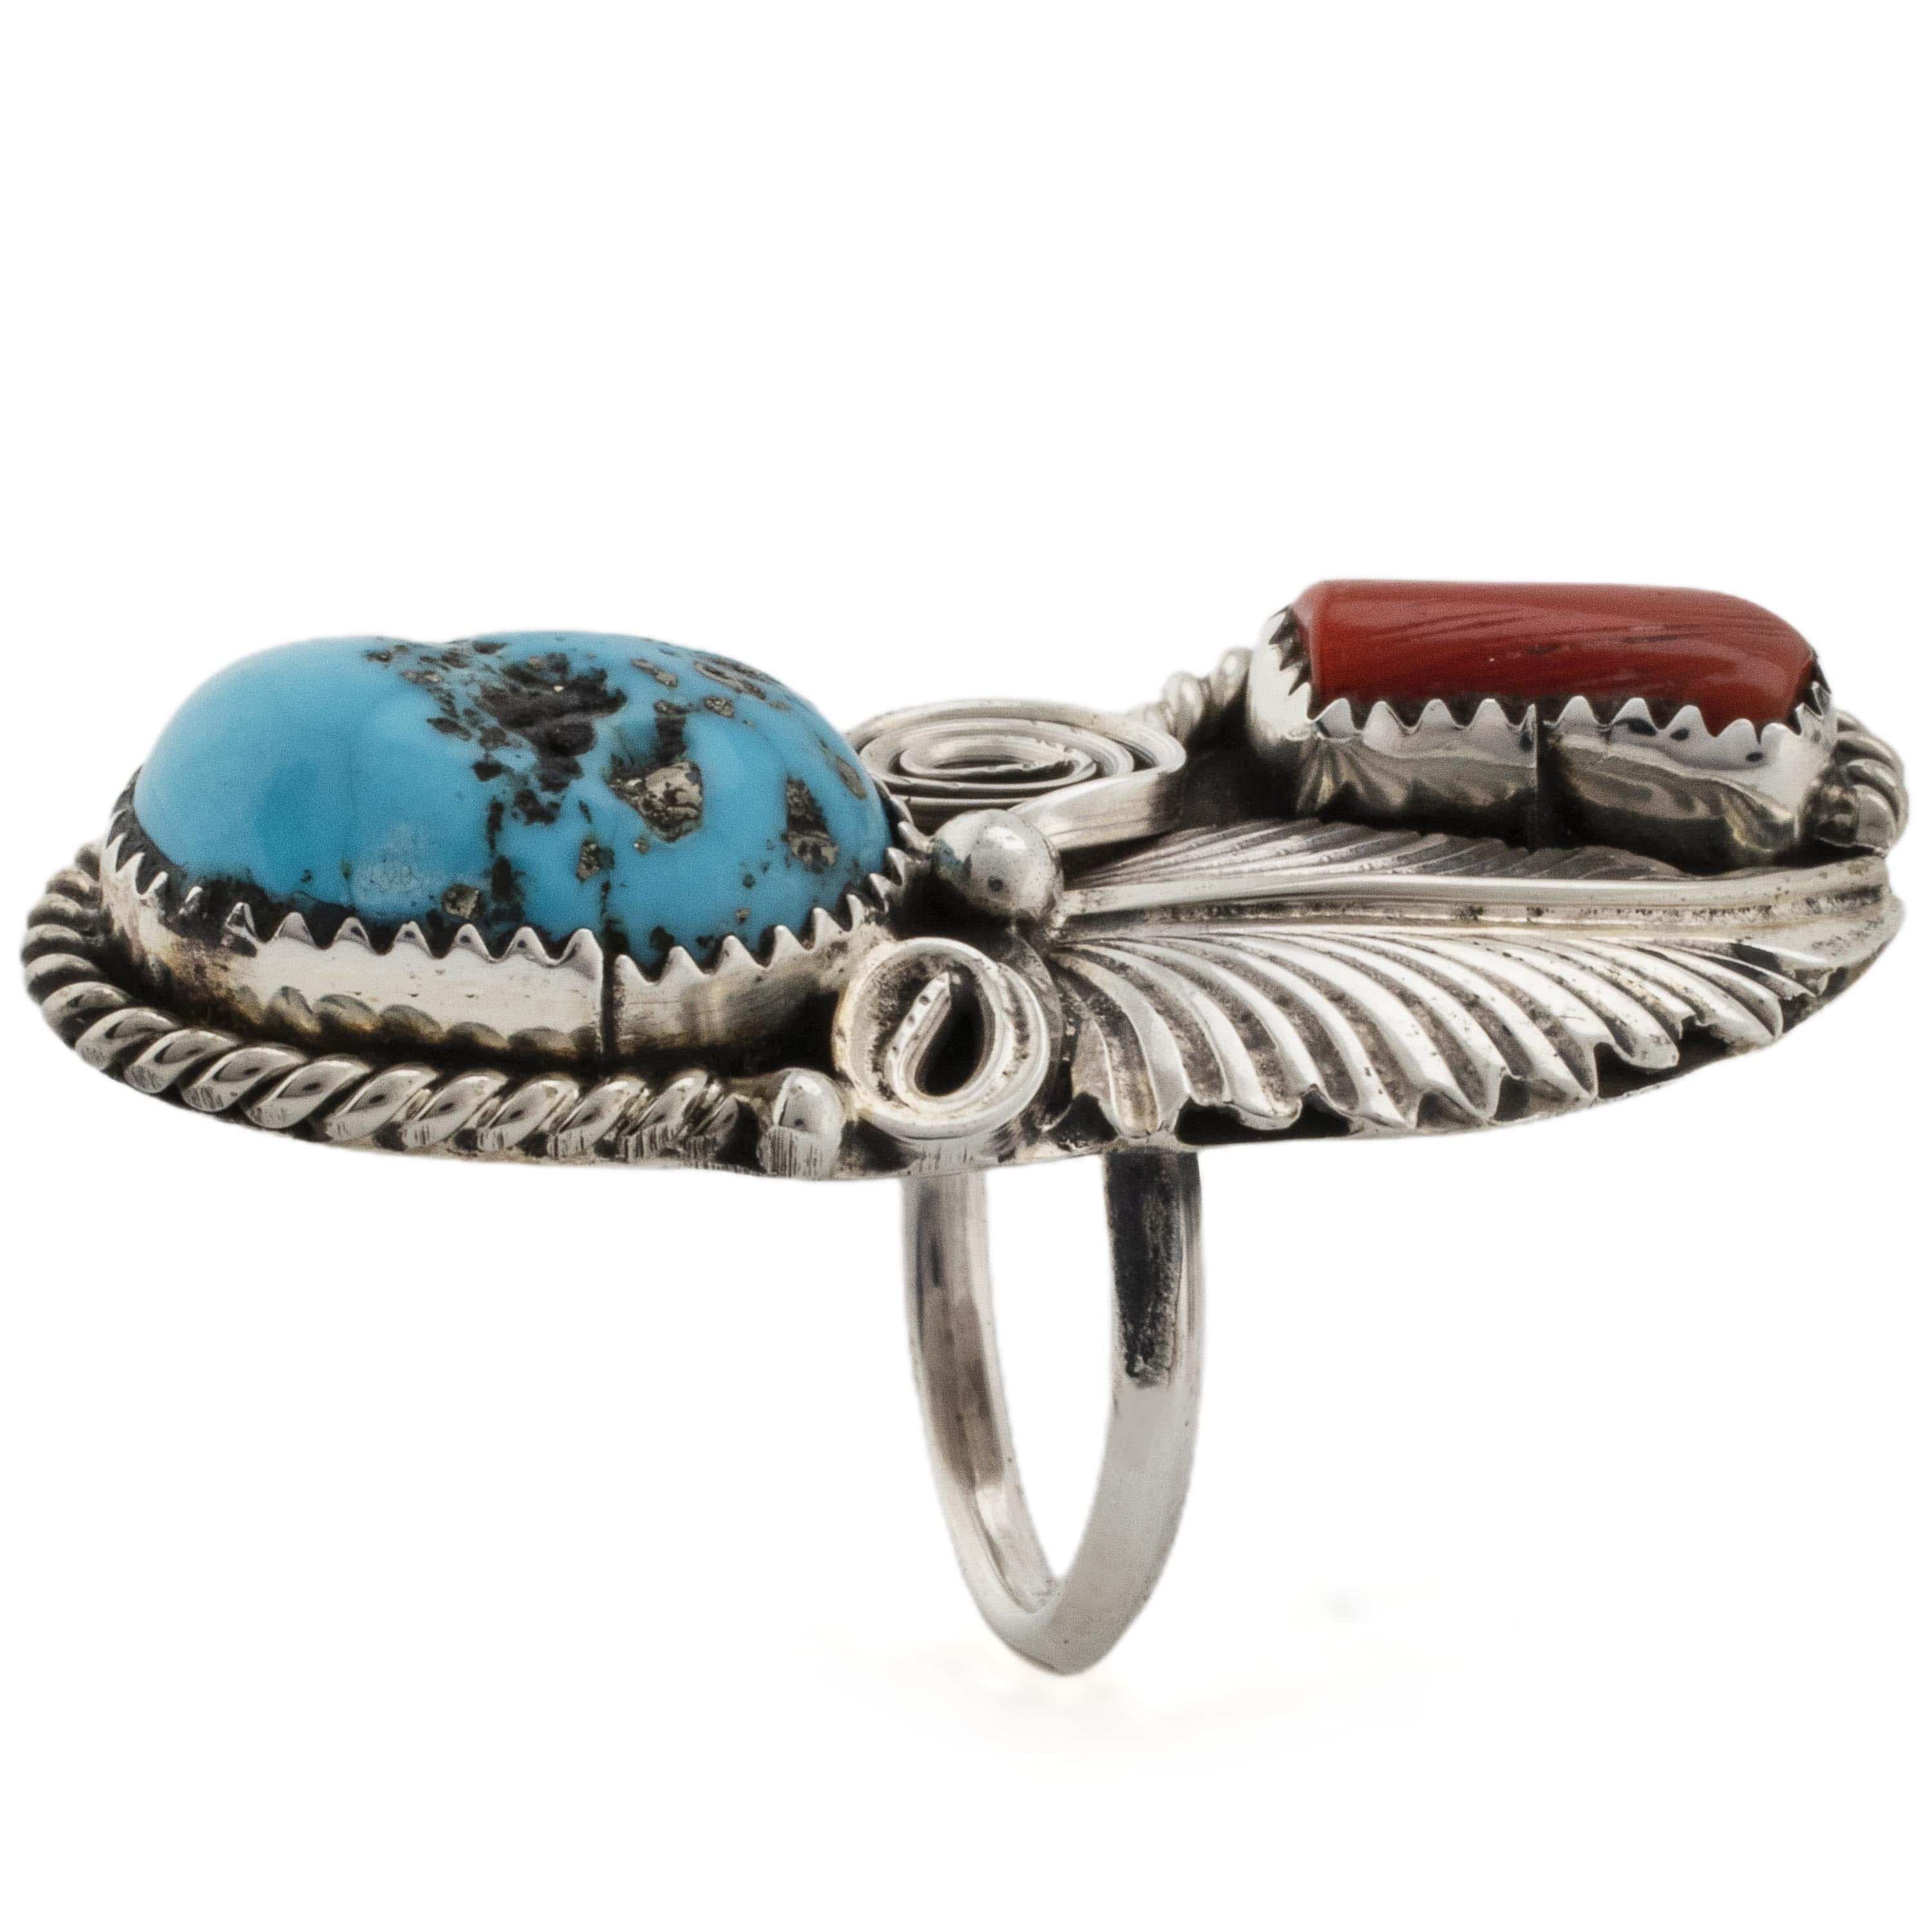 Kalifano Native American Jewelry 5 Mike Thomas Jr. Kingman Turquoise and Coral Navajo USA Native American Made 925 Sterling Silver Ring NAR800.024.5